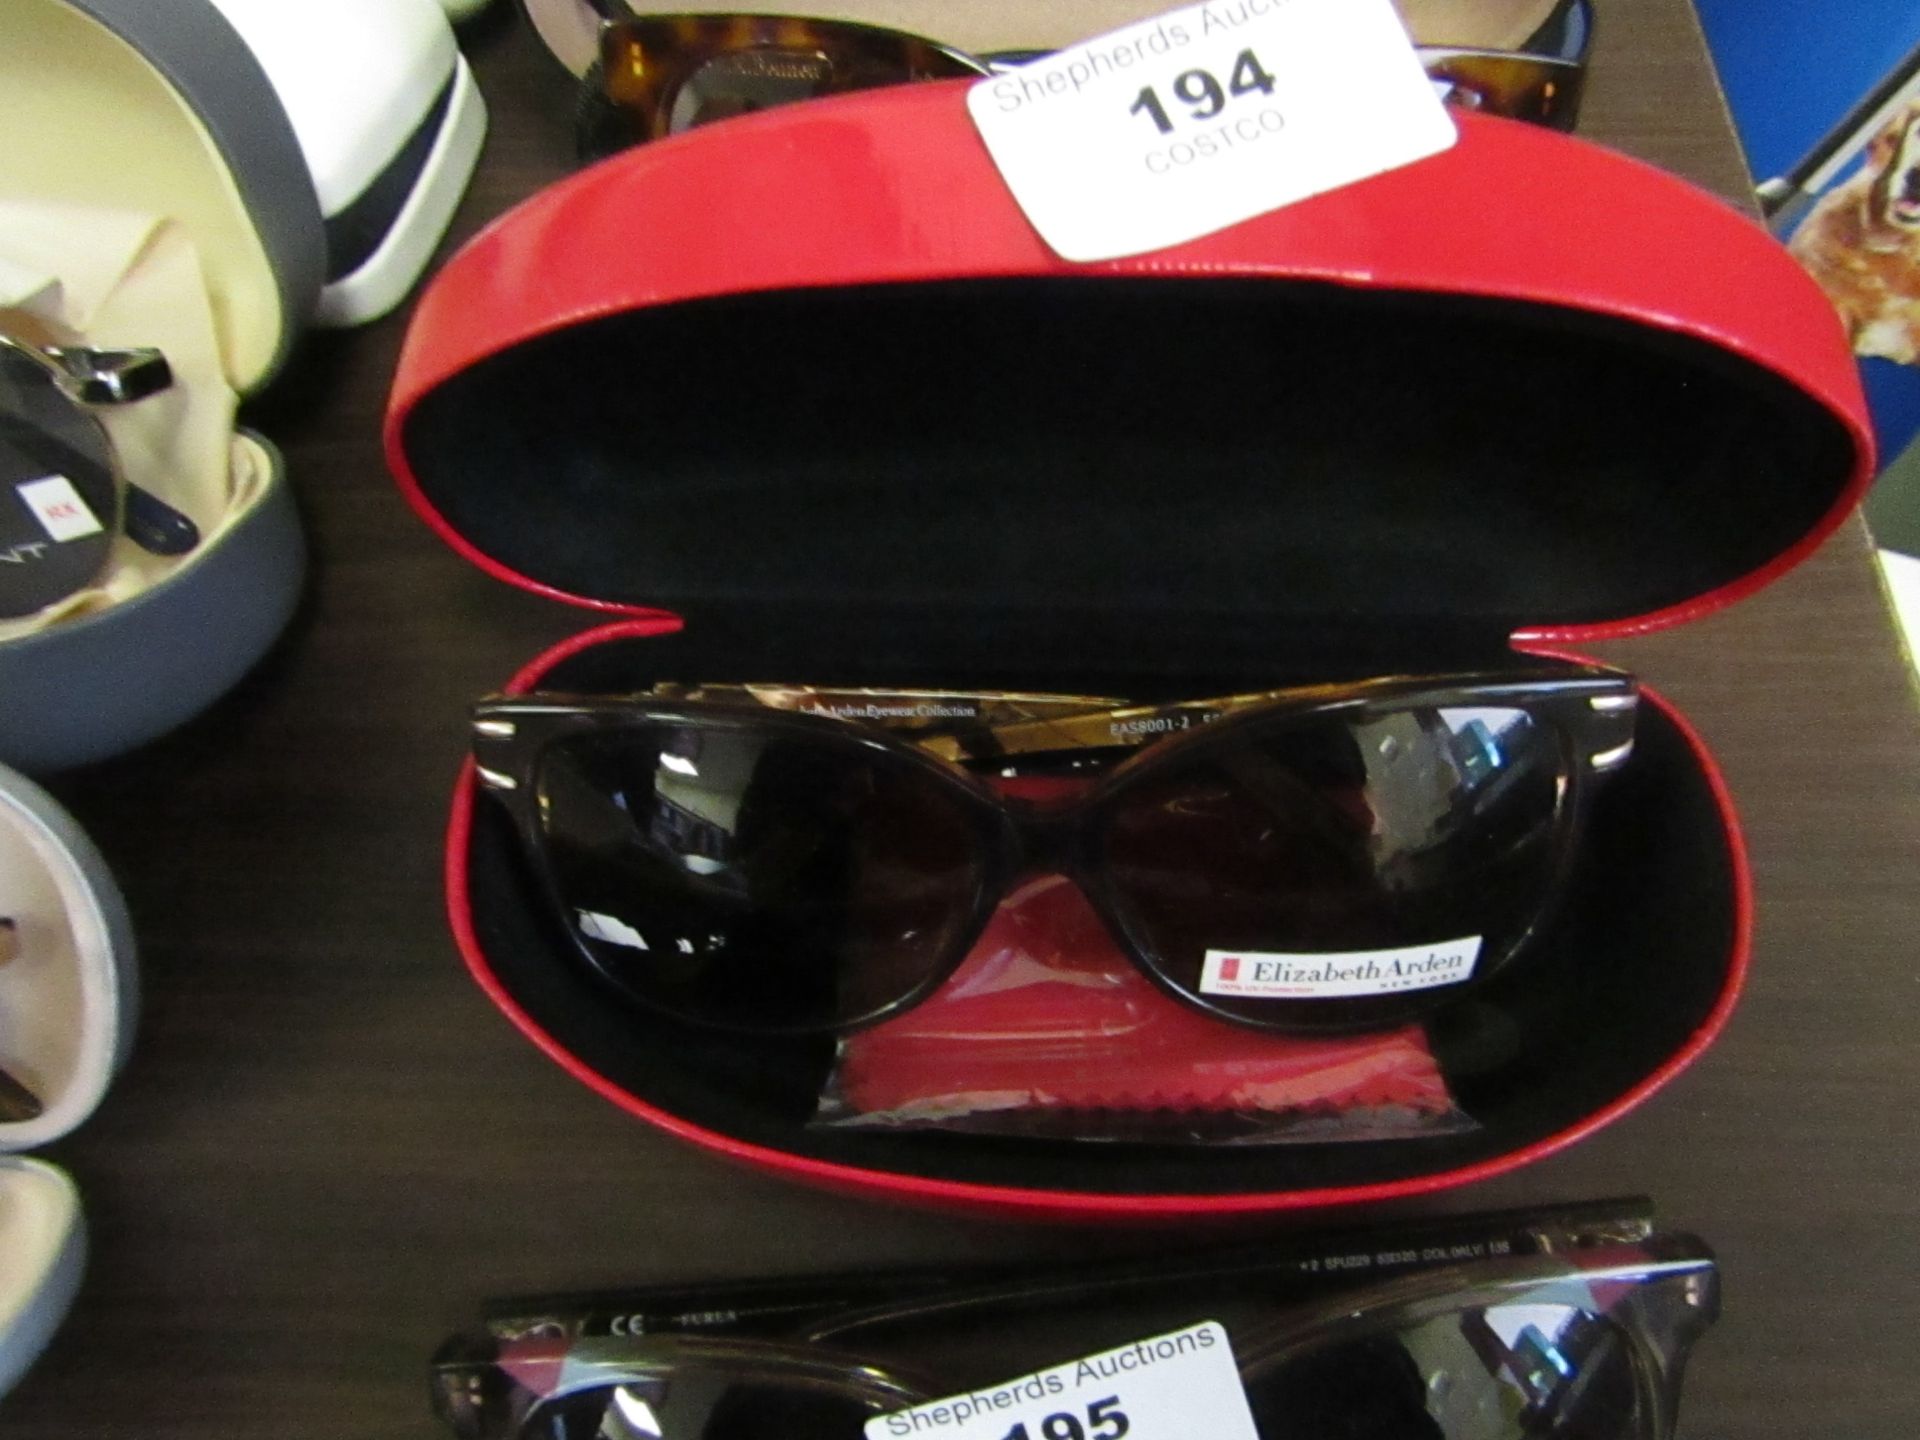 Elizabeth Arden Sunglasses with carry case, ex display